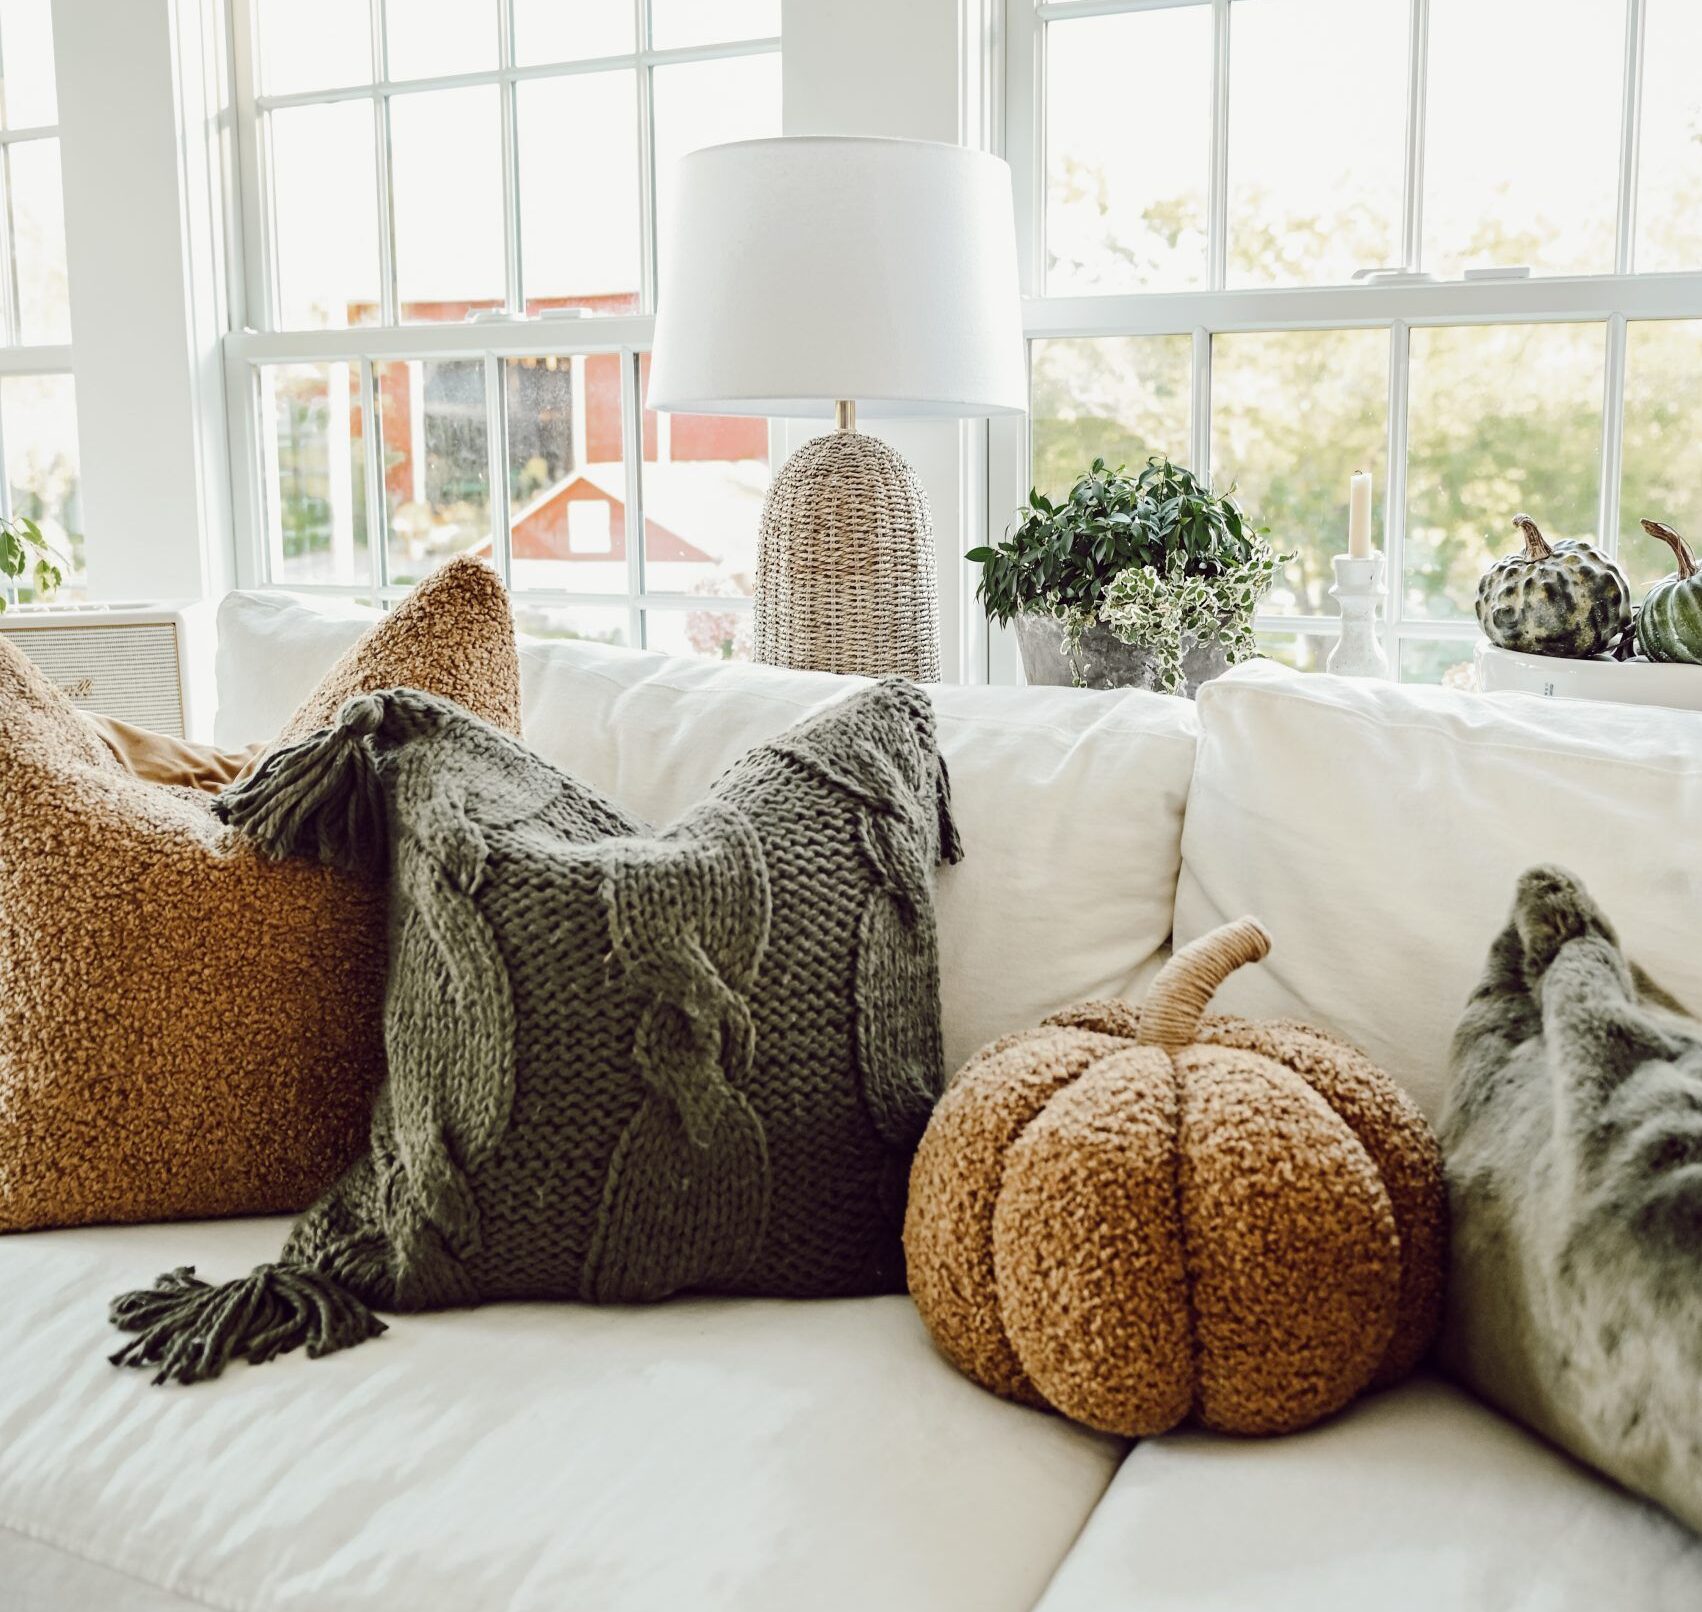 Home Staging Tips: How to Beautifully Arrange Pillows on a Bed